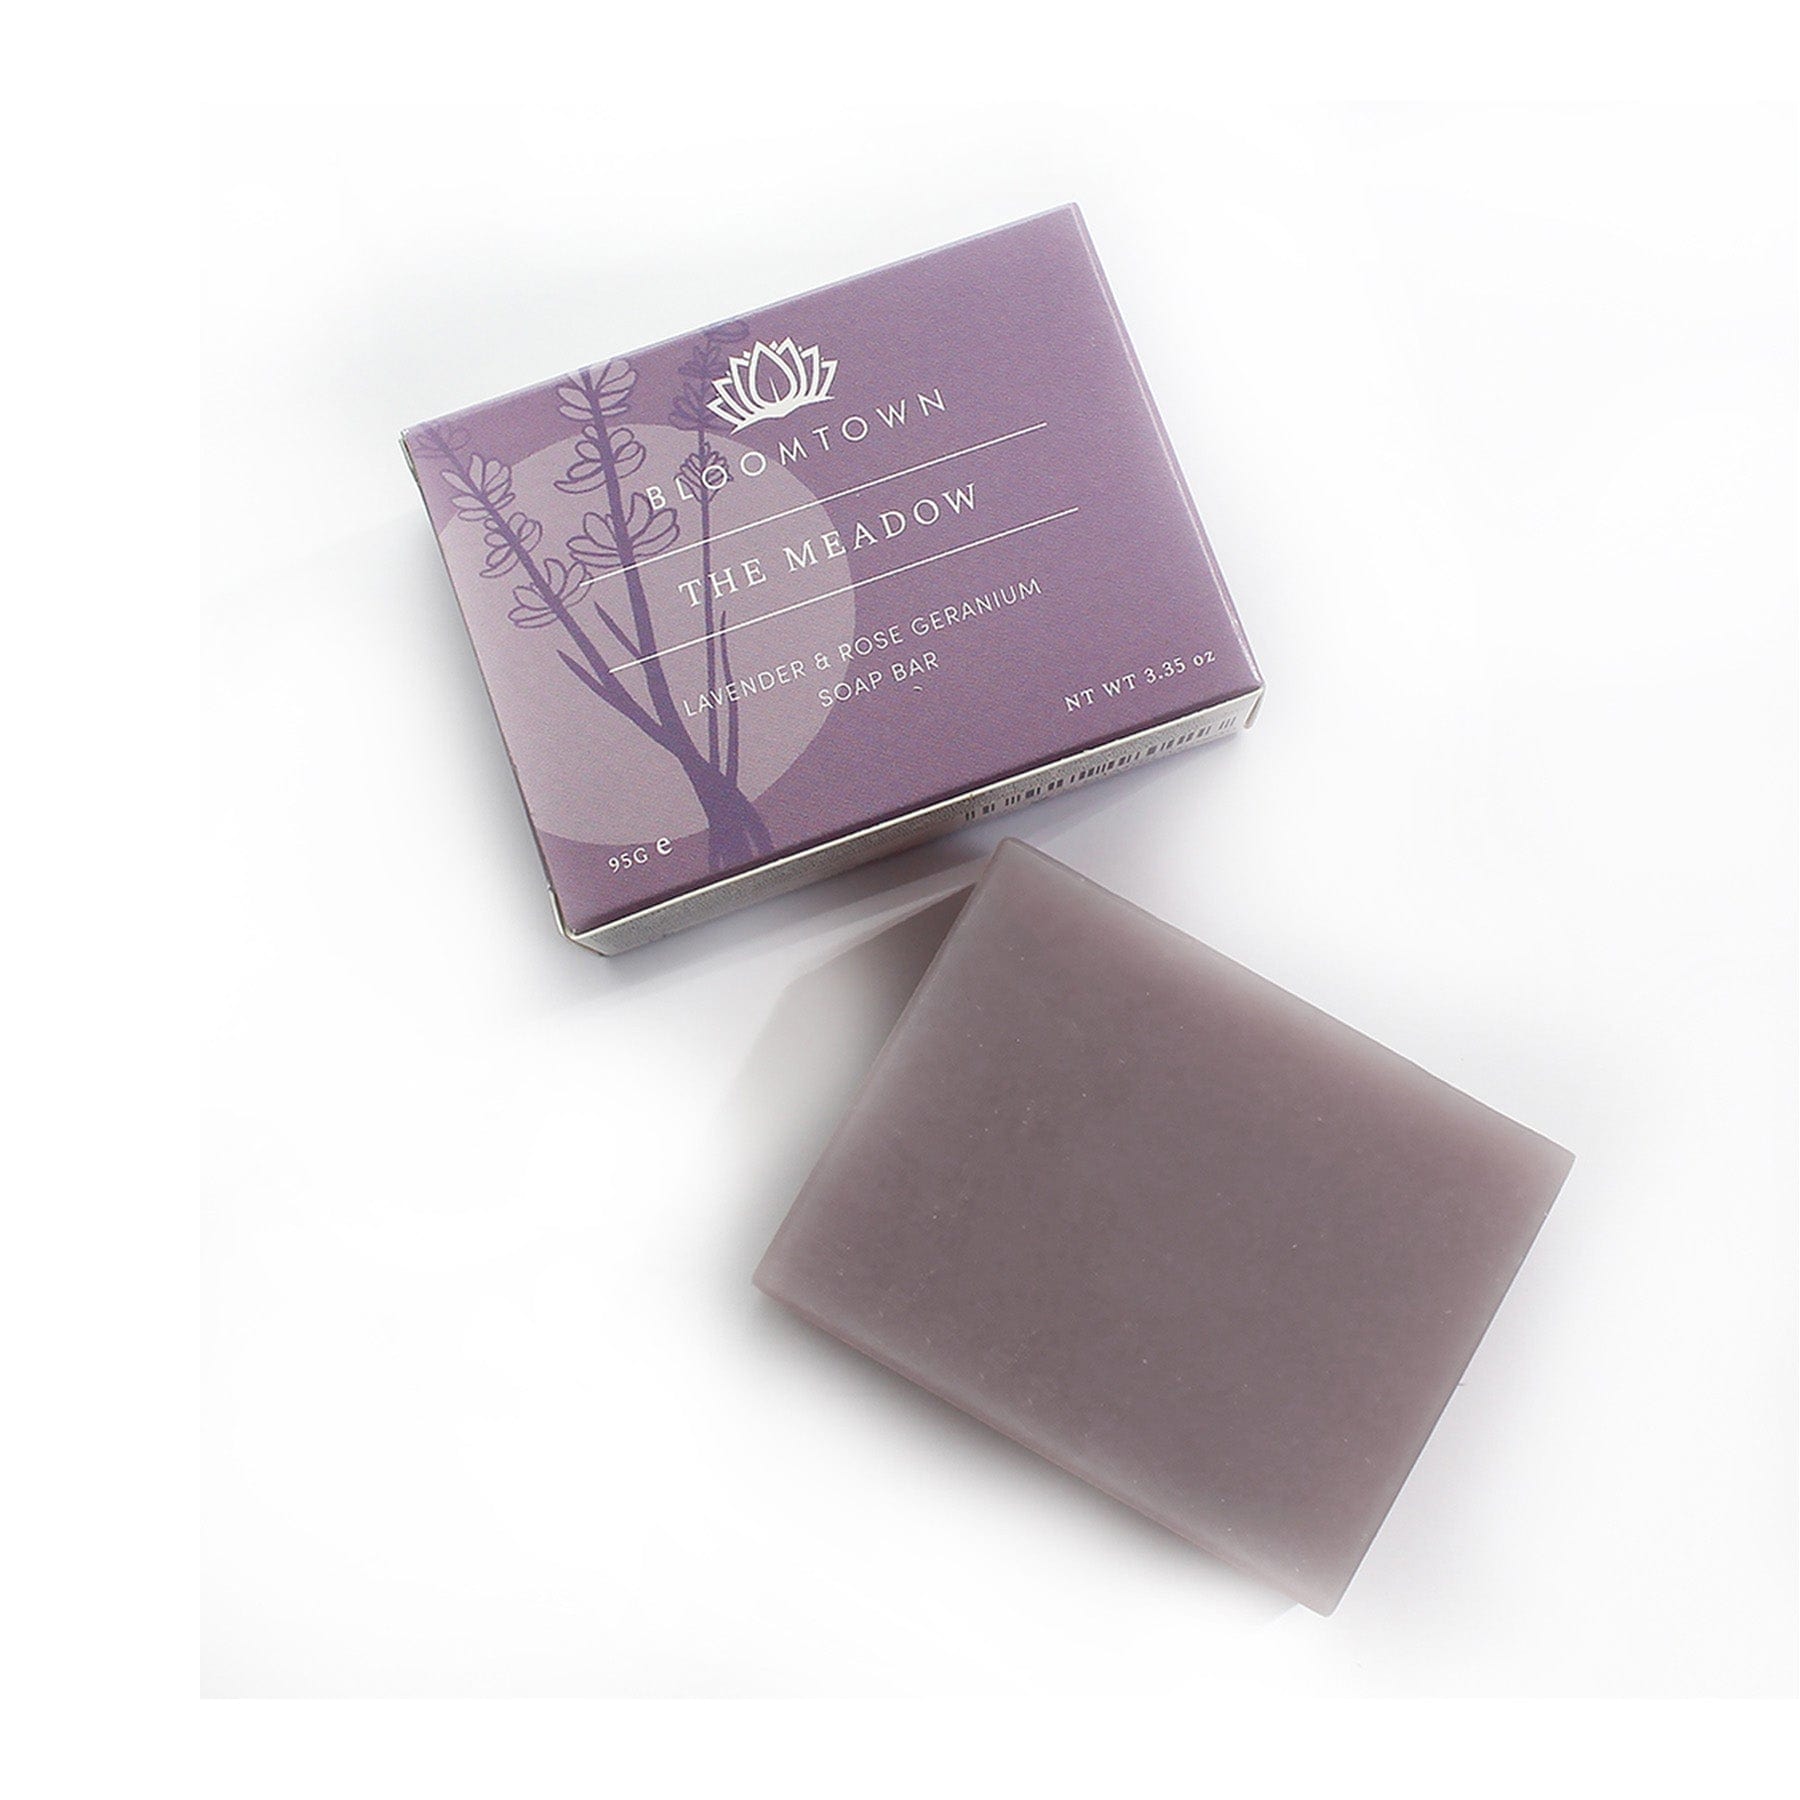 Lavender and rose geranium soap bar next to its purple packaging with botanical illustration, Bloomtown brand "The Meadow" organic and vegan skincare, white background.